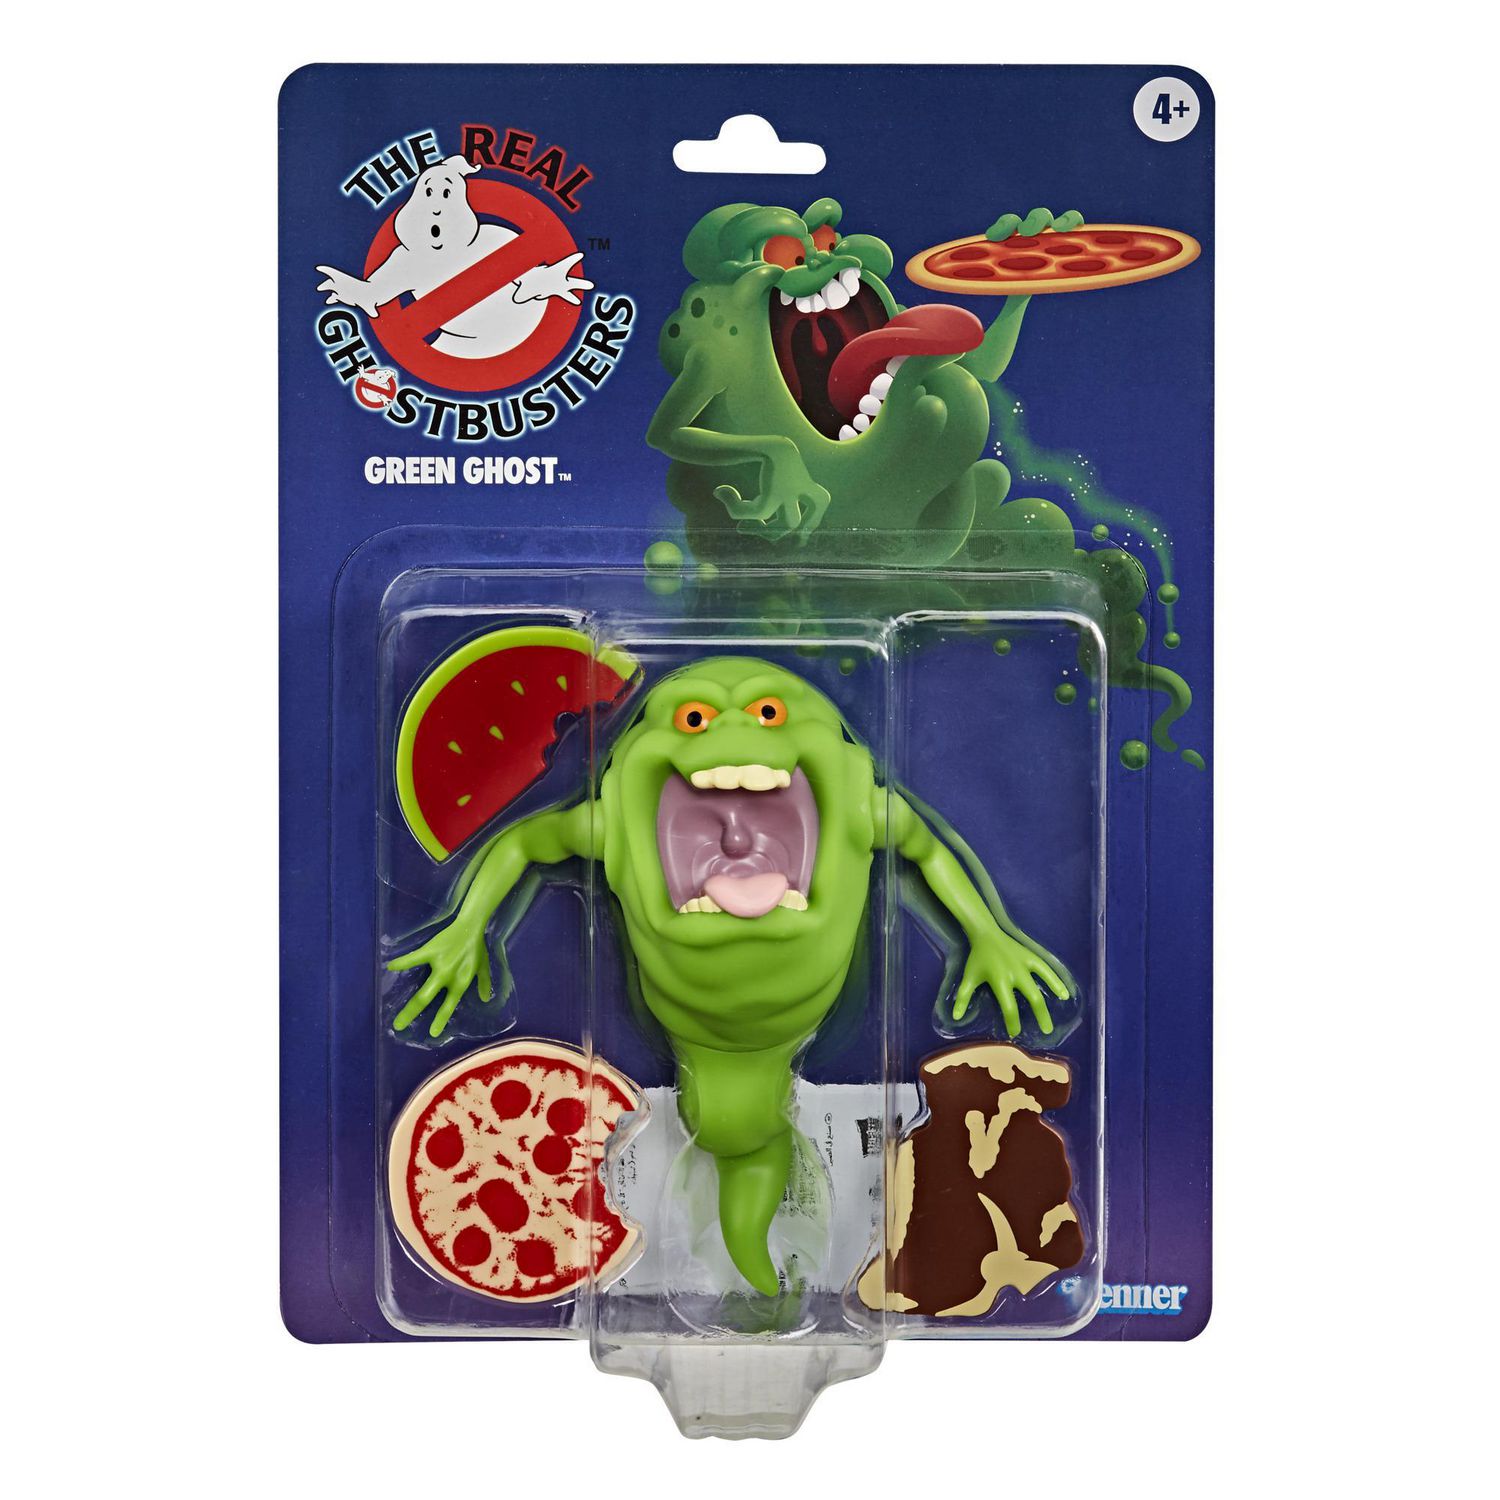 Ghostbusters Kenner Classics Green Ghost Slimer Retro Action Figure Toy ... Ghostbusters Toy